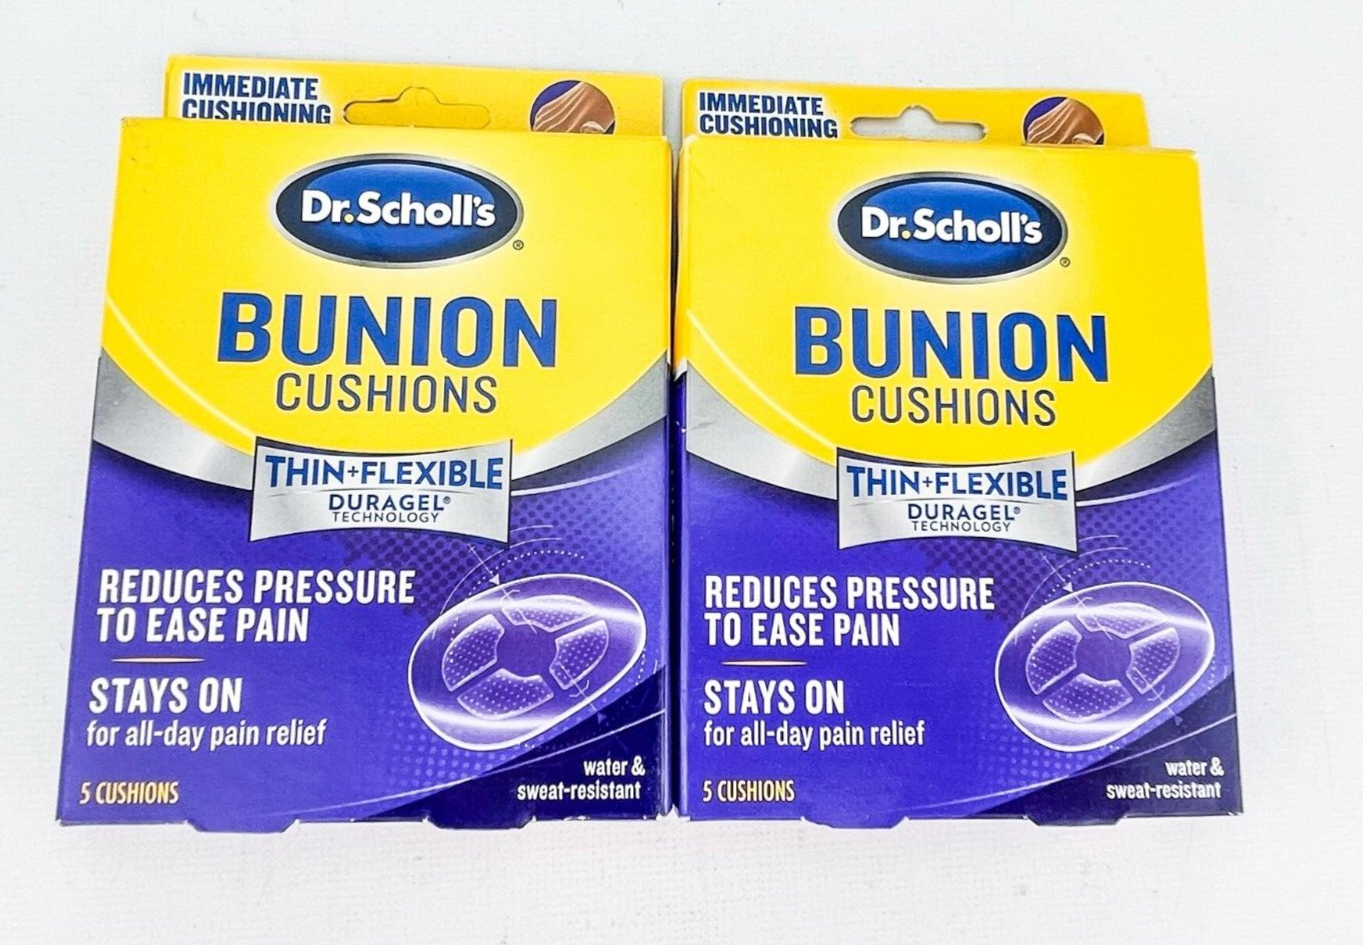 Dr Scholls Bunion Cushions Thin And Flexible Duragel 5 Cushions Per Pack Lot Of2 - $17.40